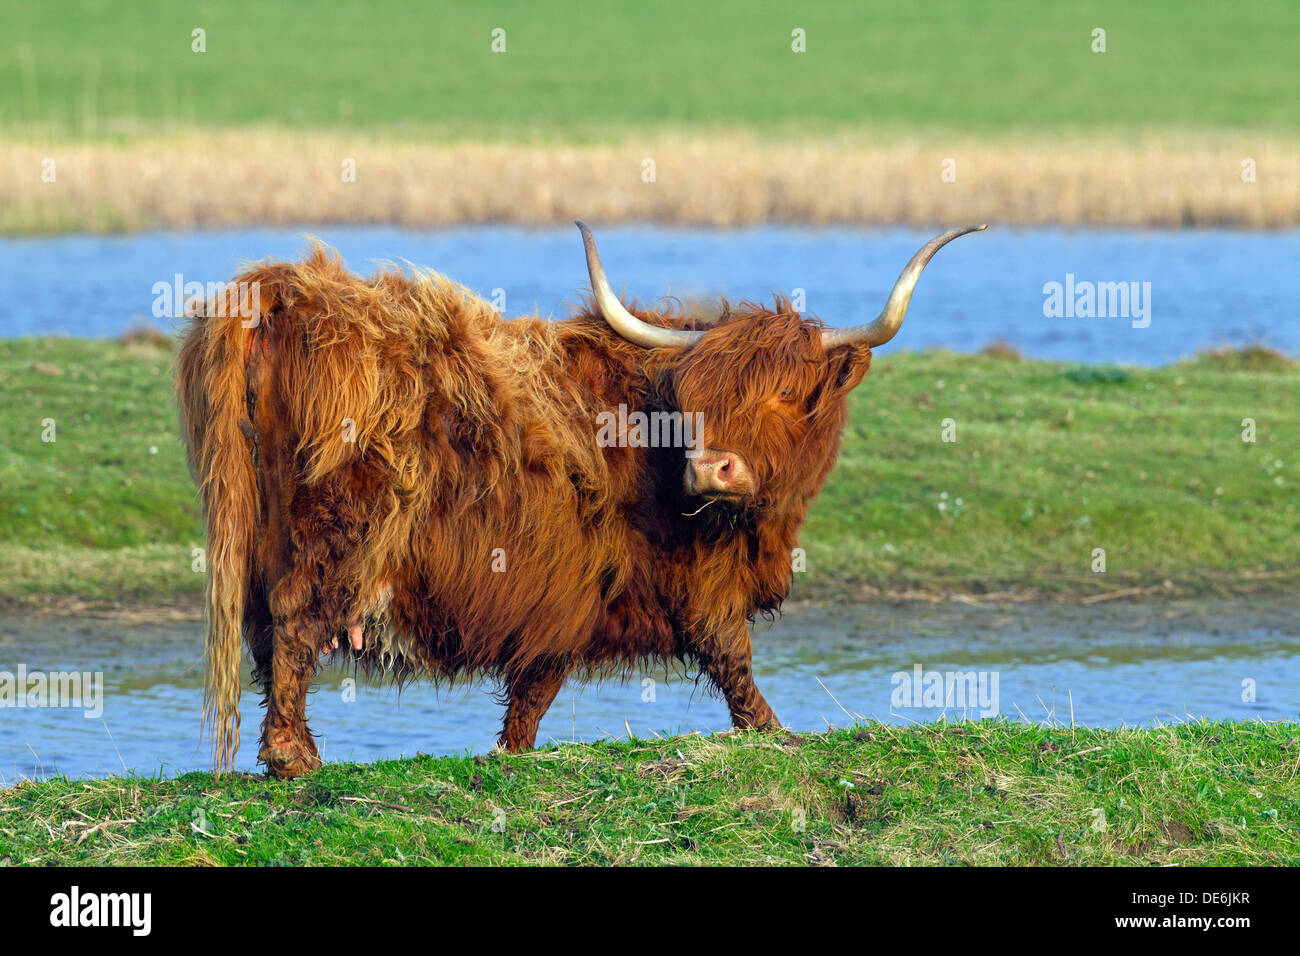 Highland cattle rouge (Bos taurus) cow in field Banque D'Images